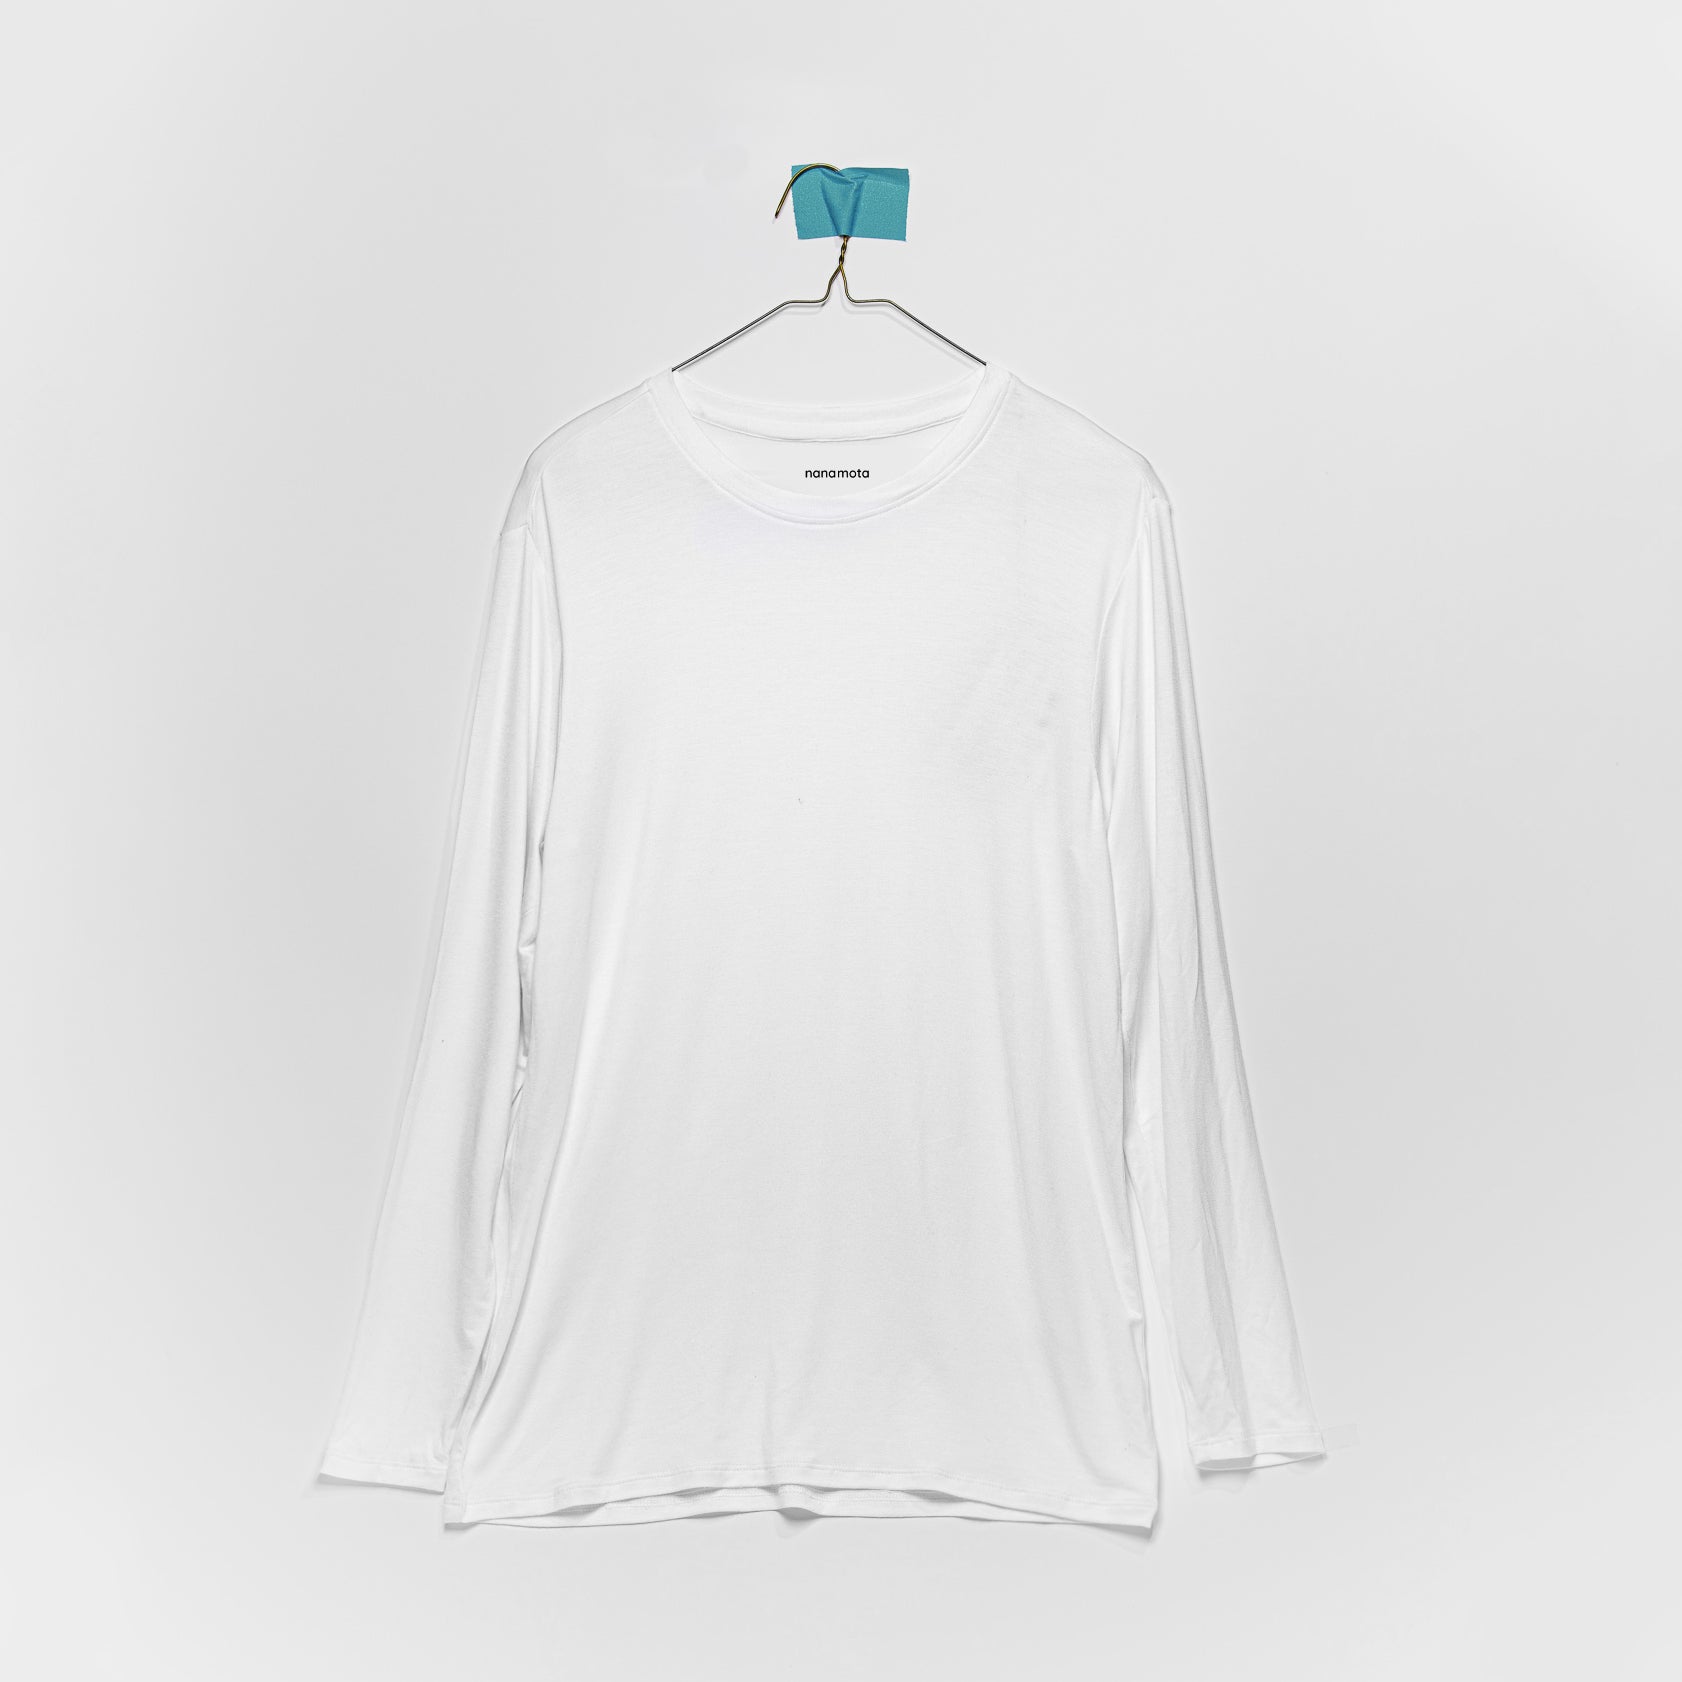 THE SOFTEST TEE' MENS FITTED LONG-SLEEVE WHITE